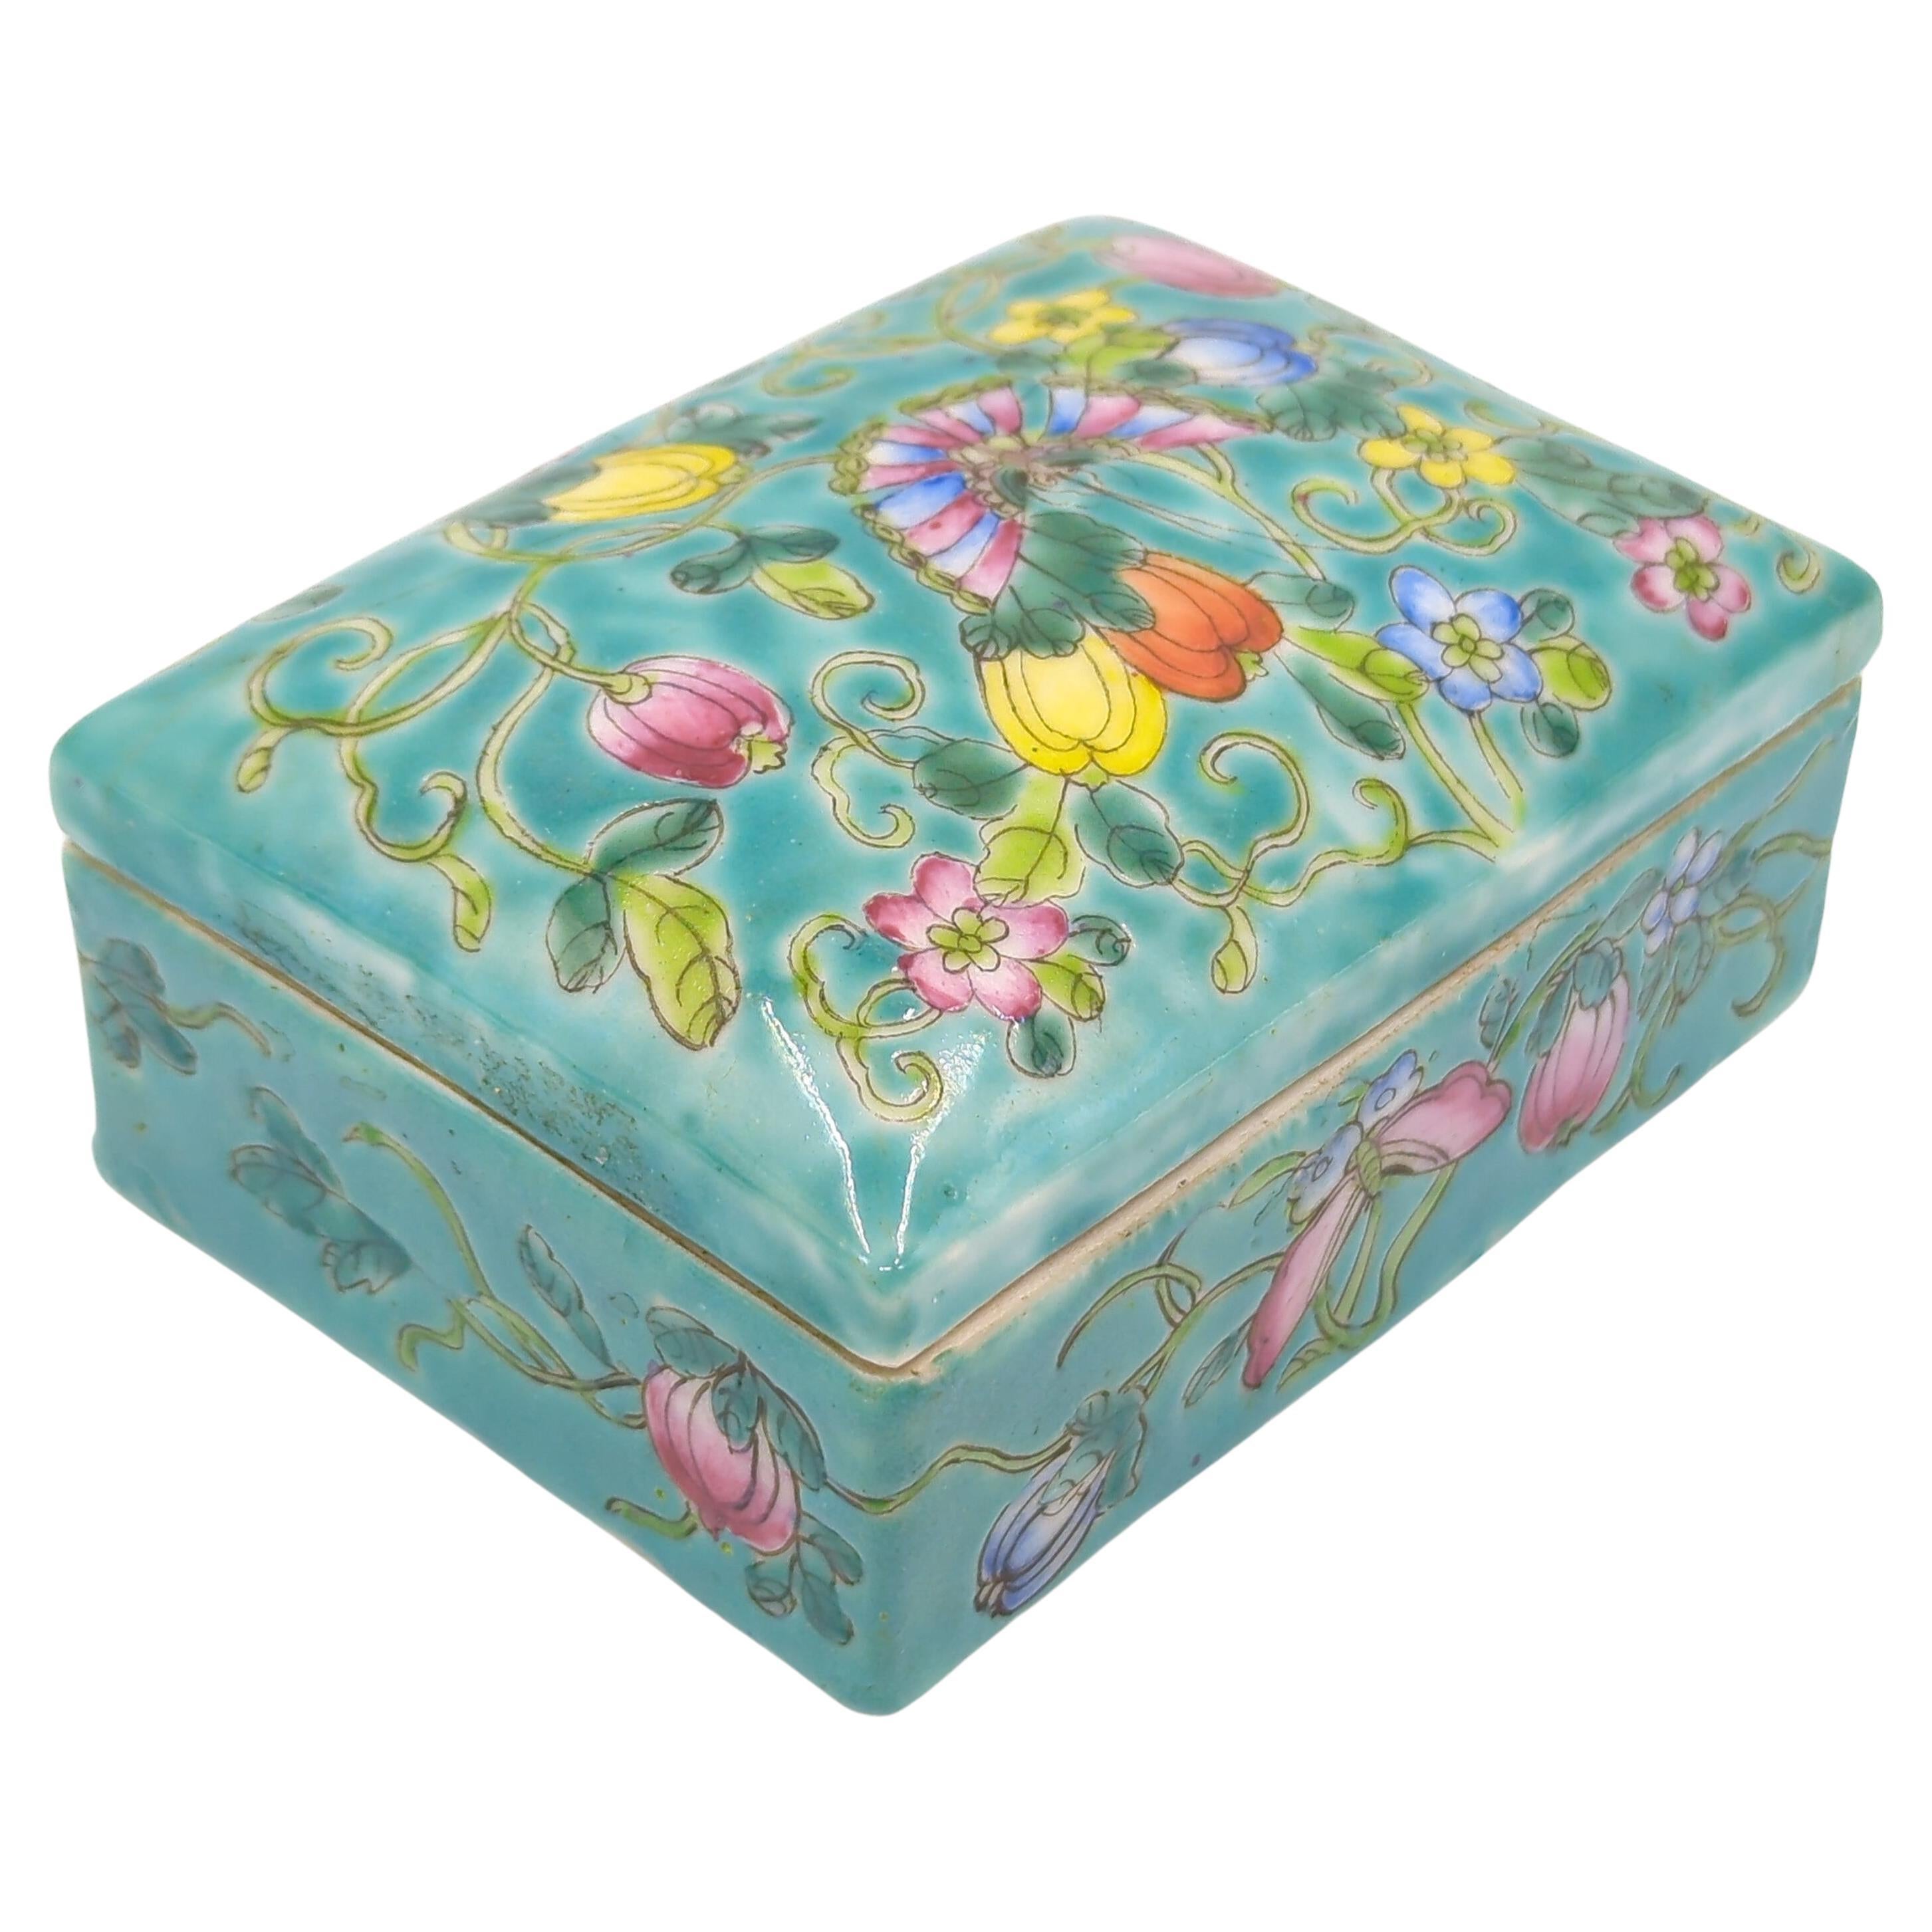 Artisan Antique Chinese Porcelain Turquoise Butterfly Covered Jewelry Box 19/20c 